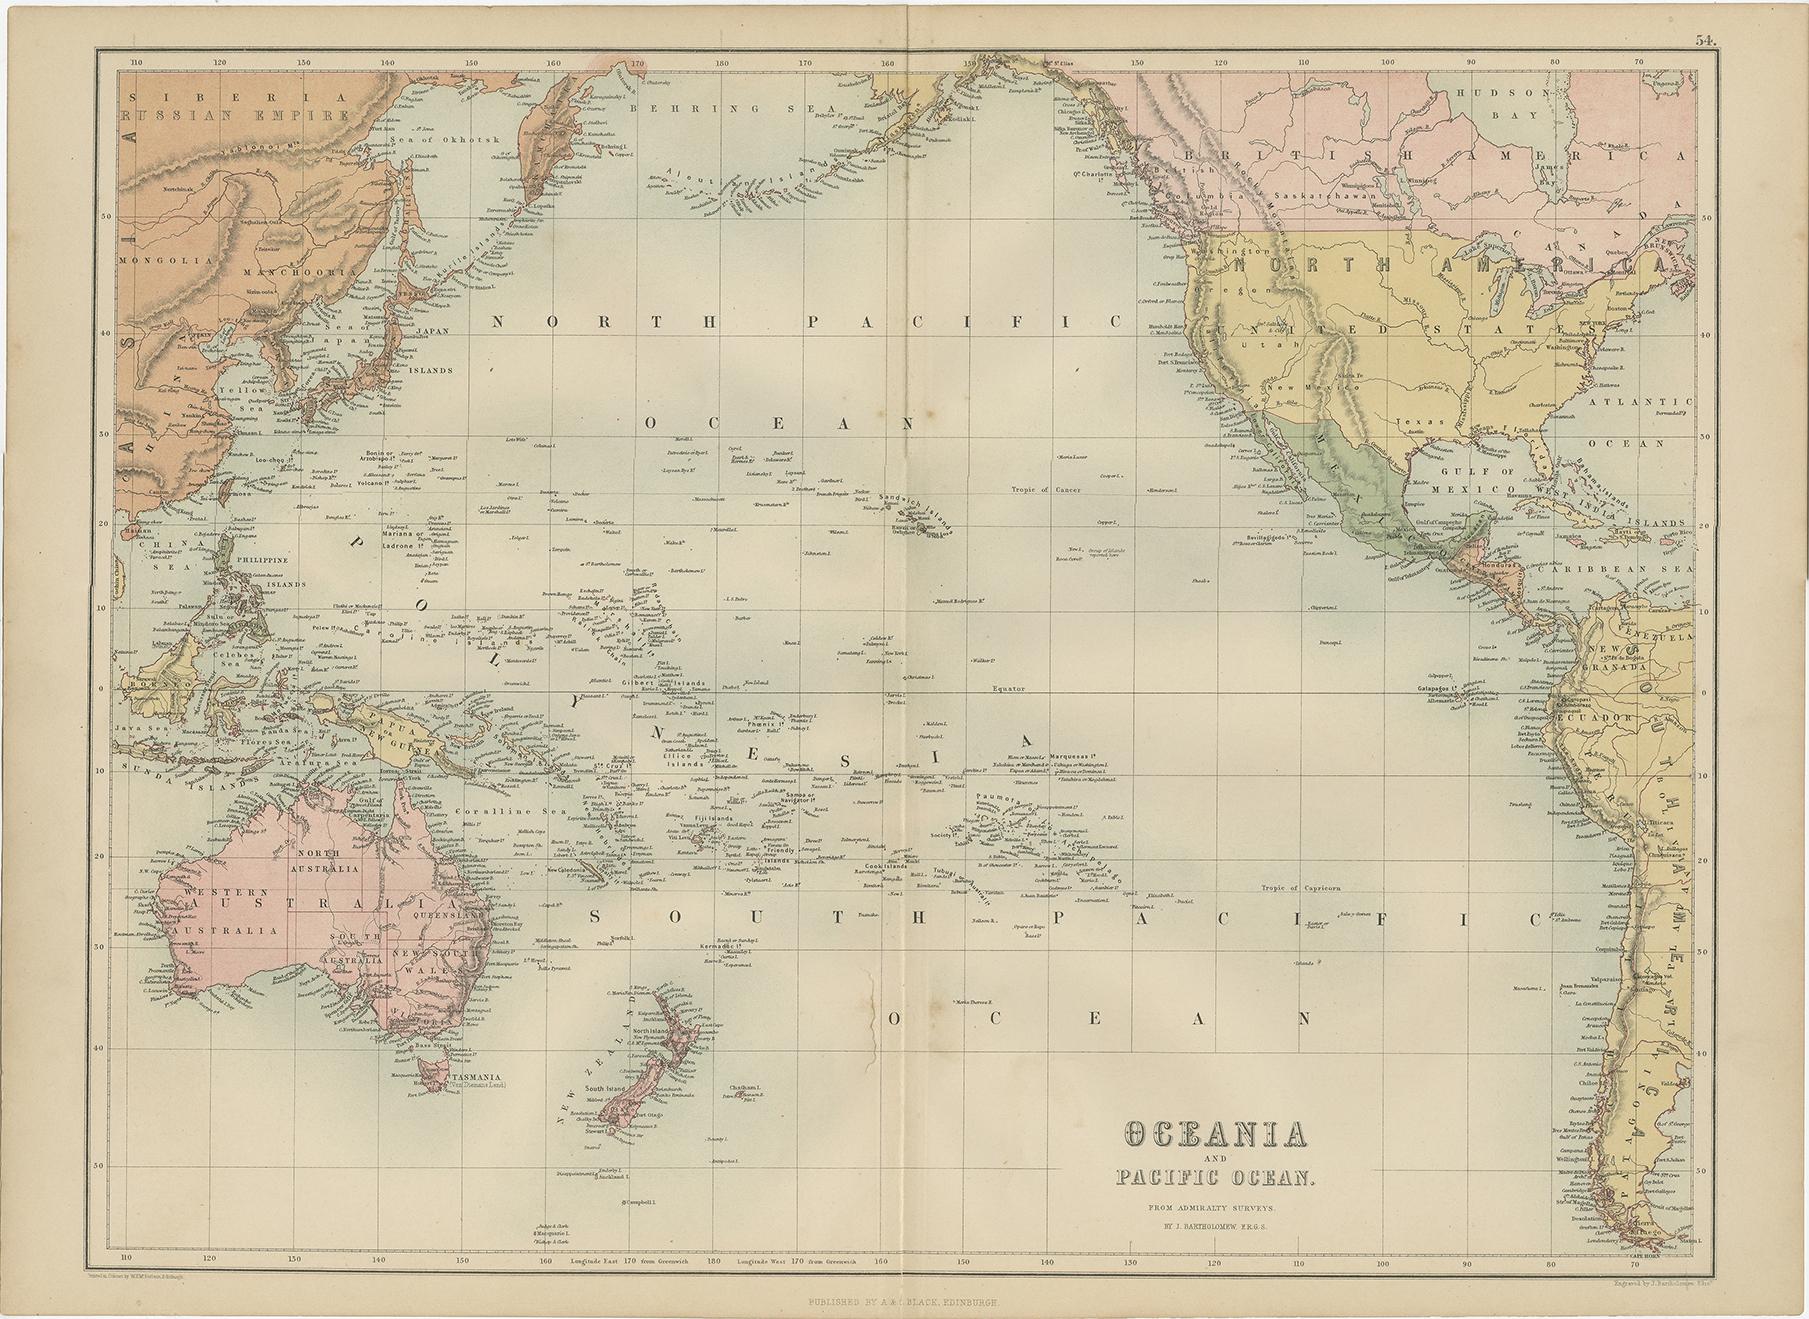 Antique map titled 'Oceania and Pacific Ocean'. Original antique map of Oceania and the Pacific Ocean. This map originates from ‘Black's General Atlas of The World’. Published by A & C. Black, 1870.